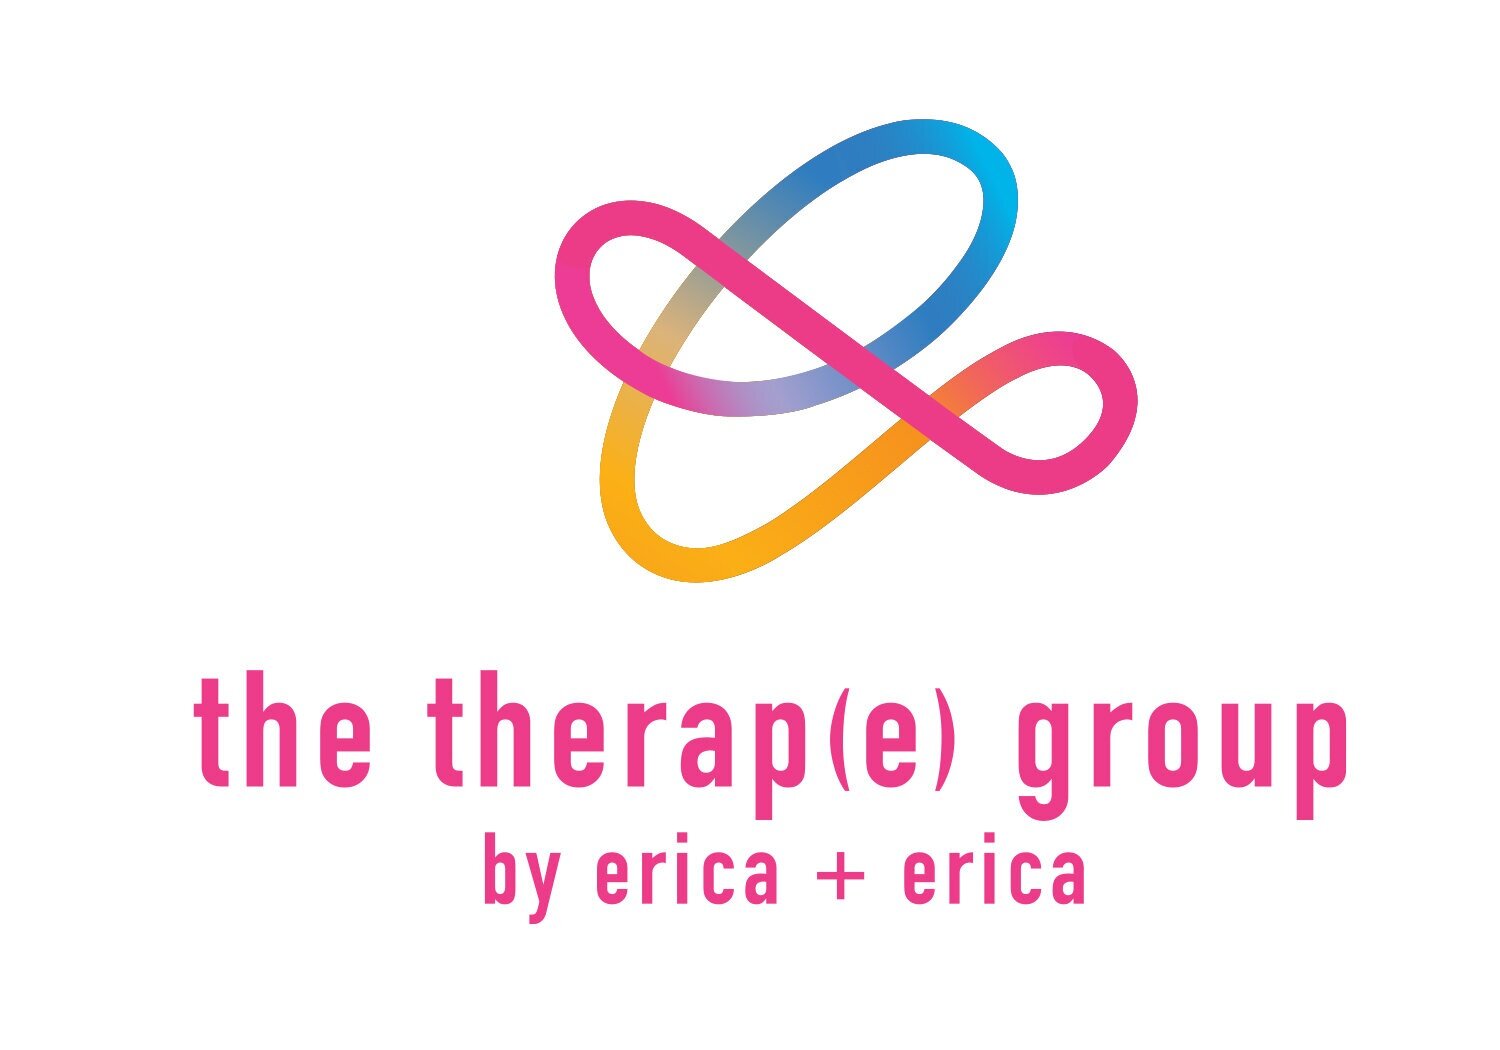 the therap(e) group